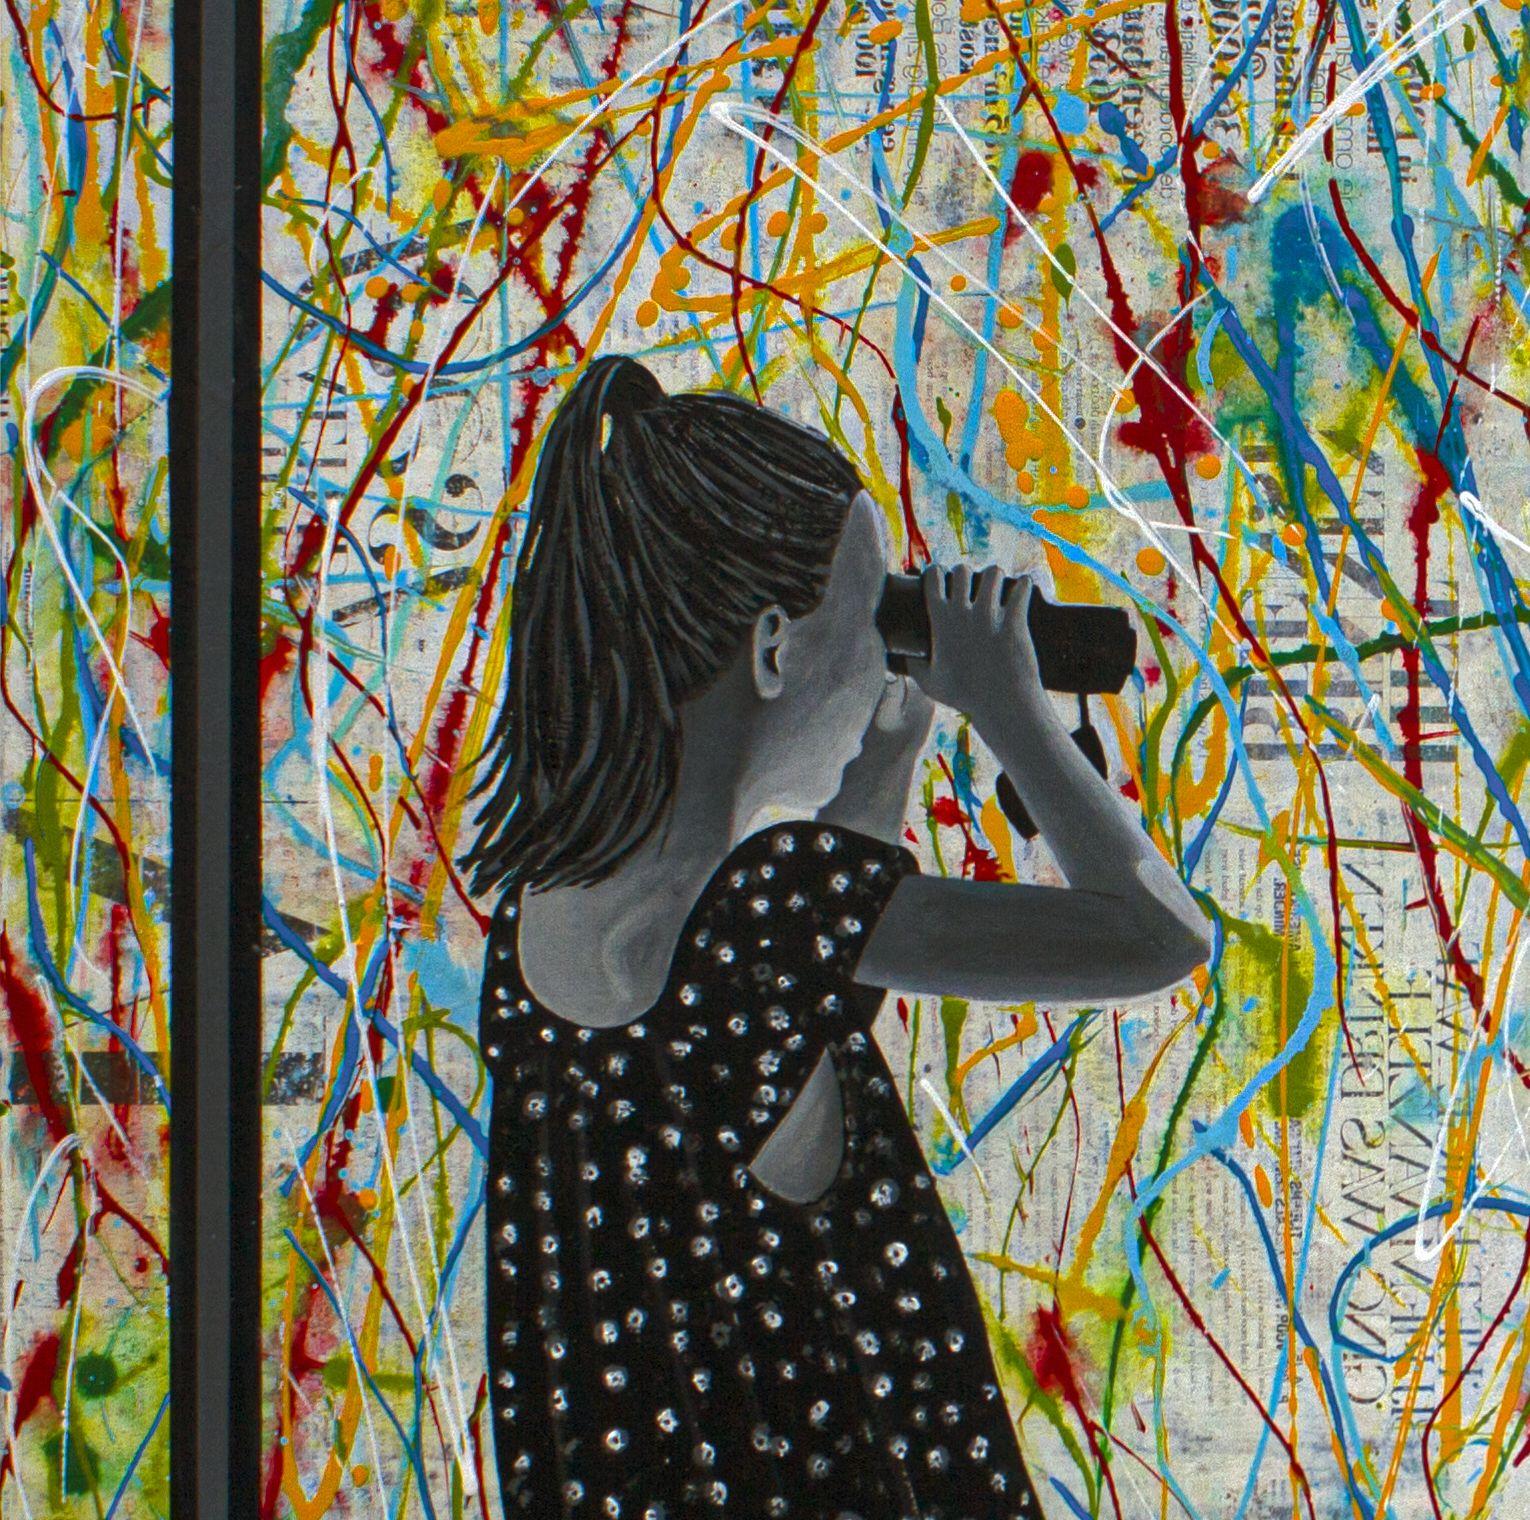 ROOM WITH A VIEW, Mixed Media on Canvas - Street Art Mixed Media Art by db Waterman